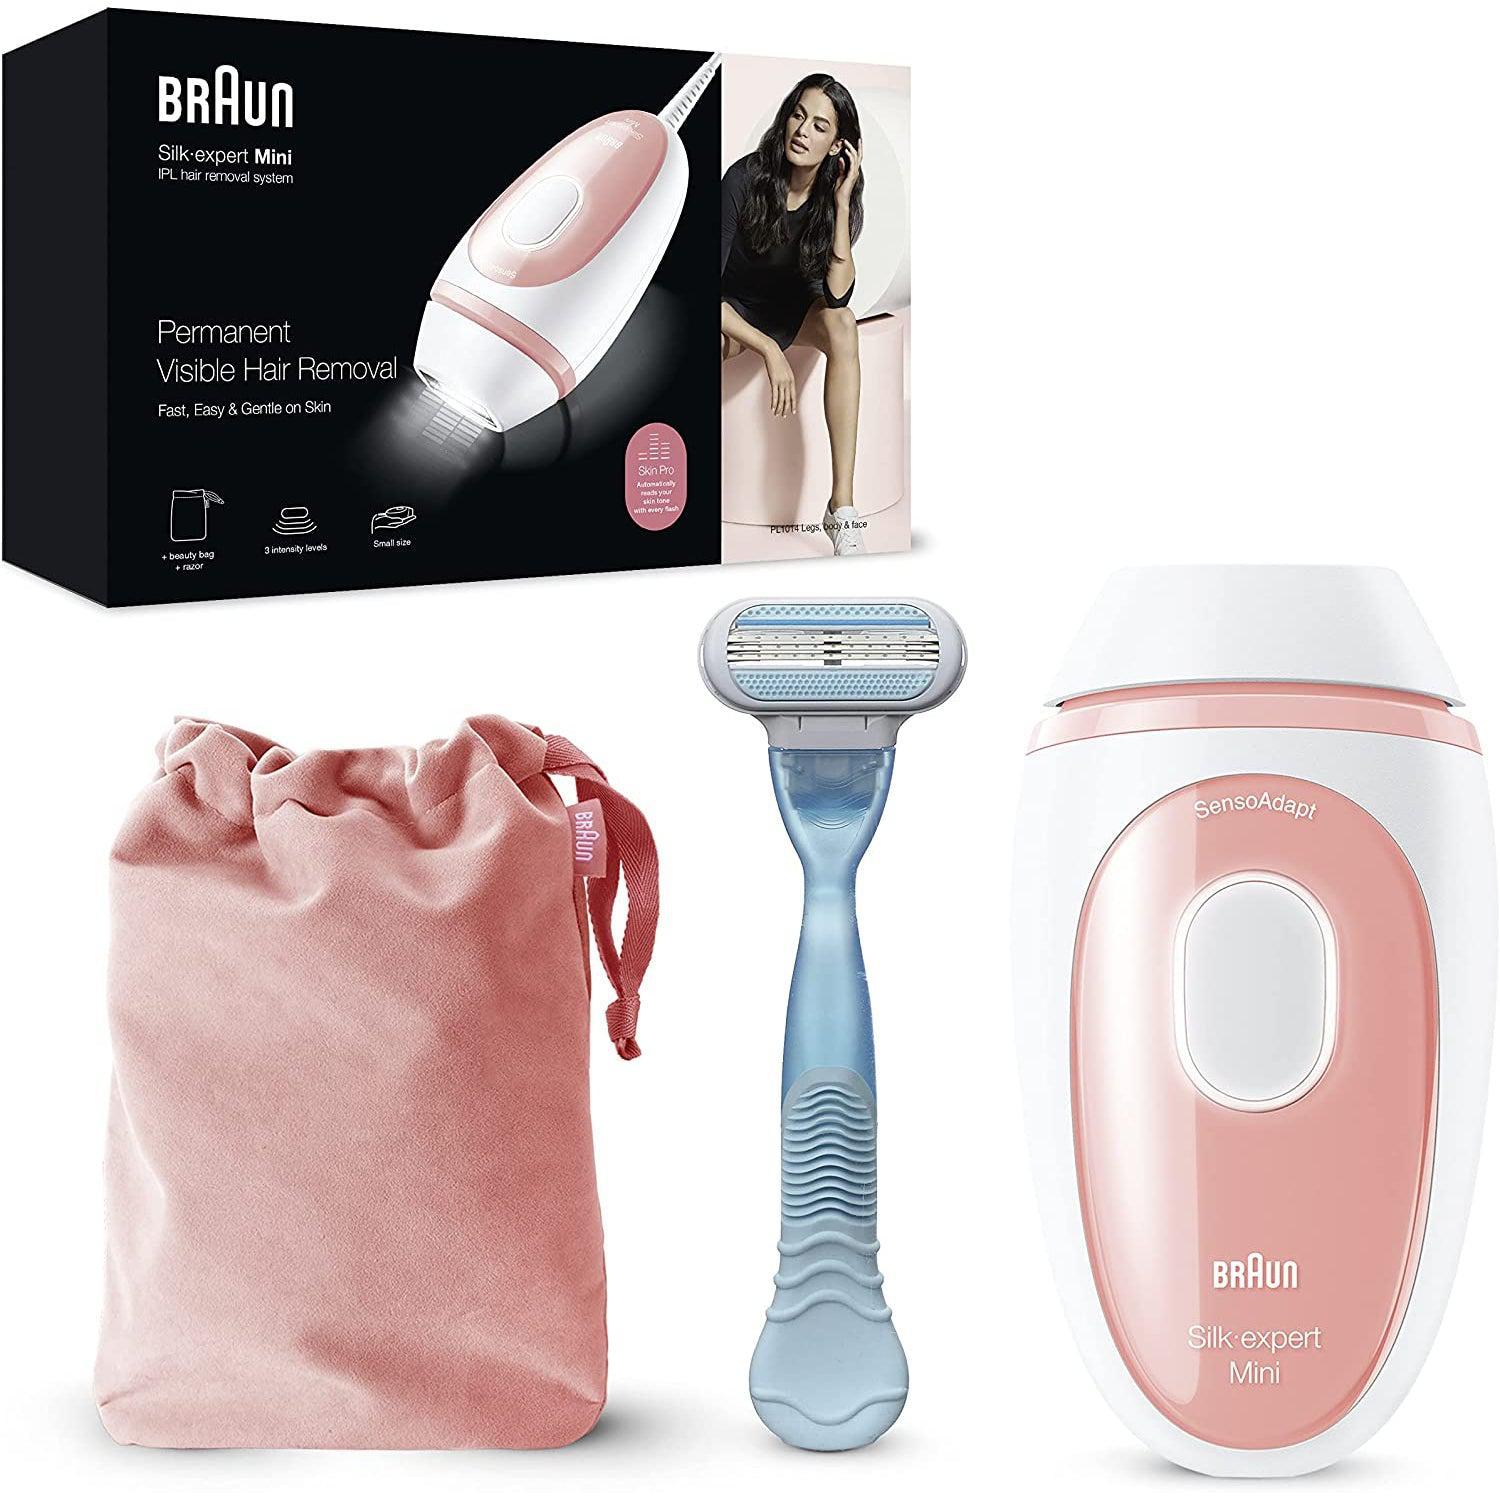 Braun IPL Silk·Expert Mini PL1014 Latest Generation IPL for Women, Permanent Visible Hair Removal, White/Pink, with Travel Pouch, - Healthxpress.ie